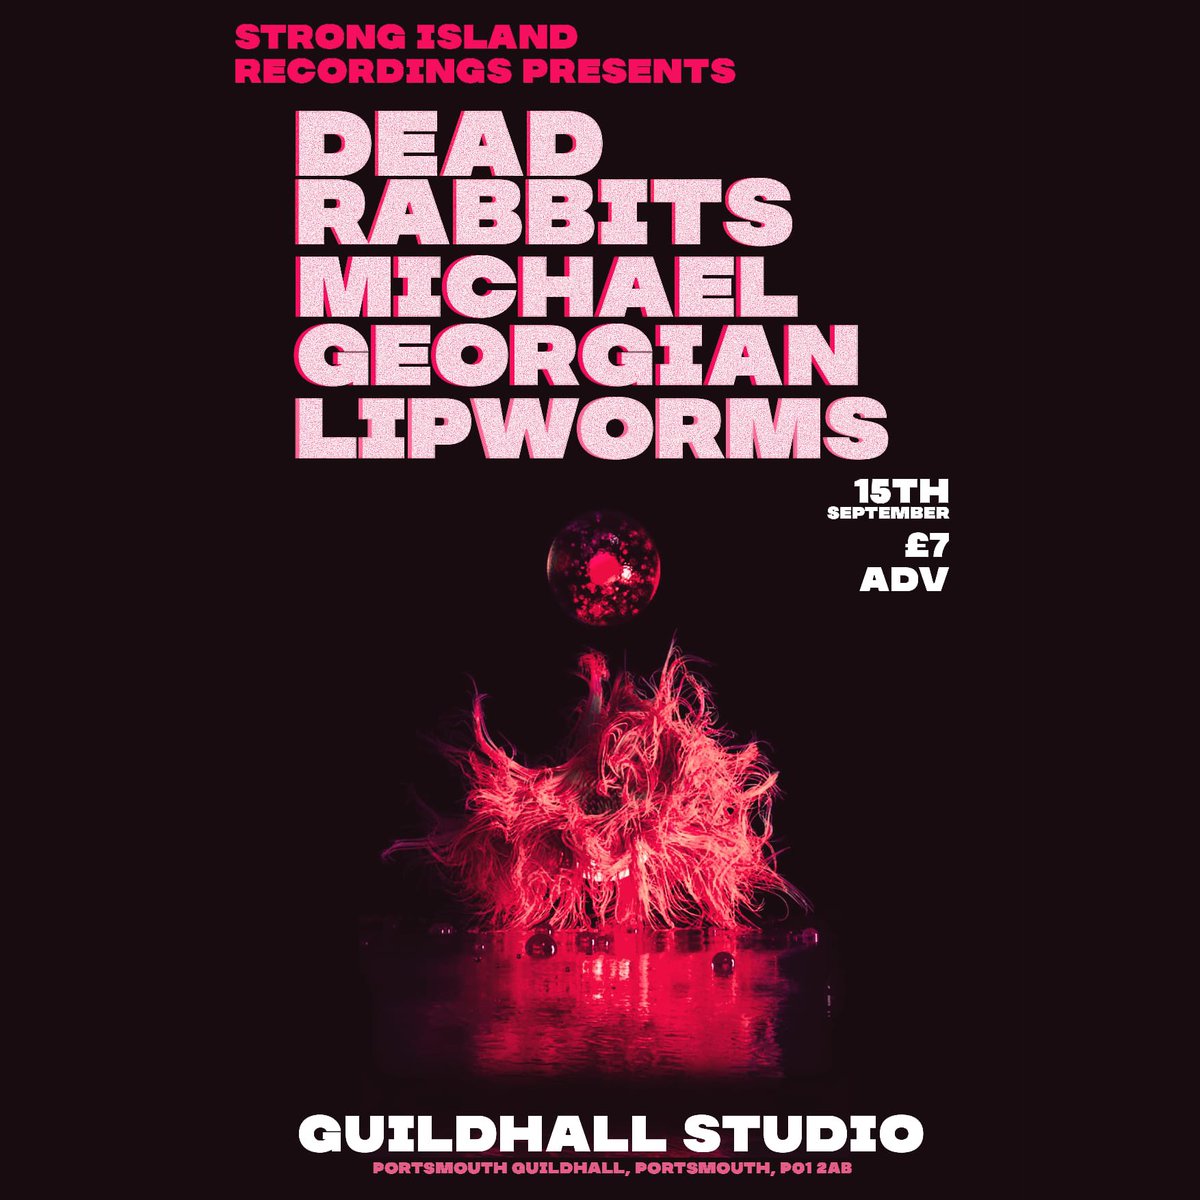 Strong Island Recordings celebrate their birthday 🎂 at @PortsmouthGhall Studio on September 15th, the same date we launched the label at @SouthseaFest. Joining us is Fuzz Club Records’ @DeadRabbitsUK, @M__Georgian and Portsmouth's finest @Lipworms.